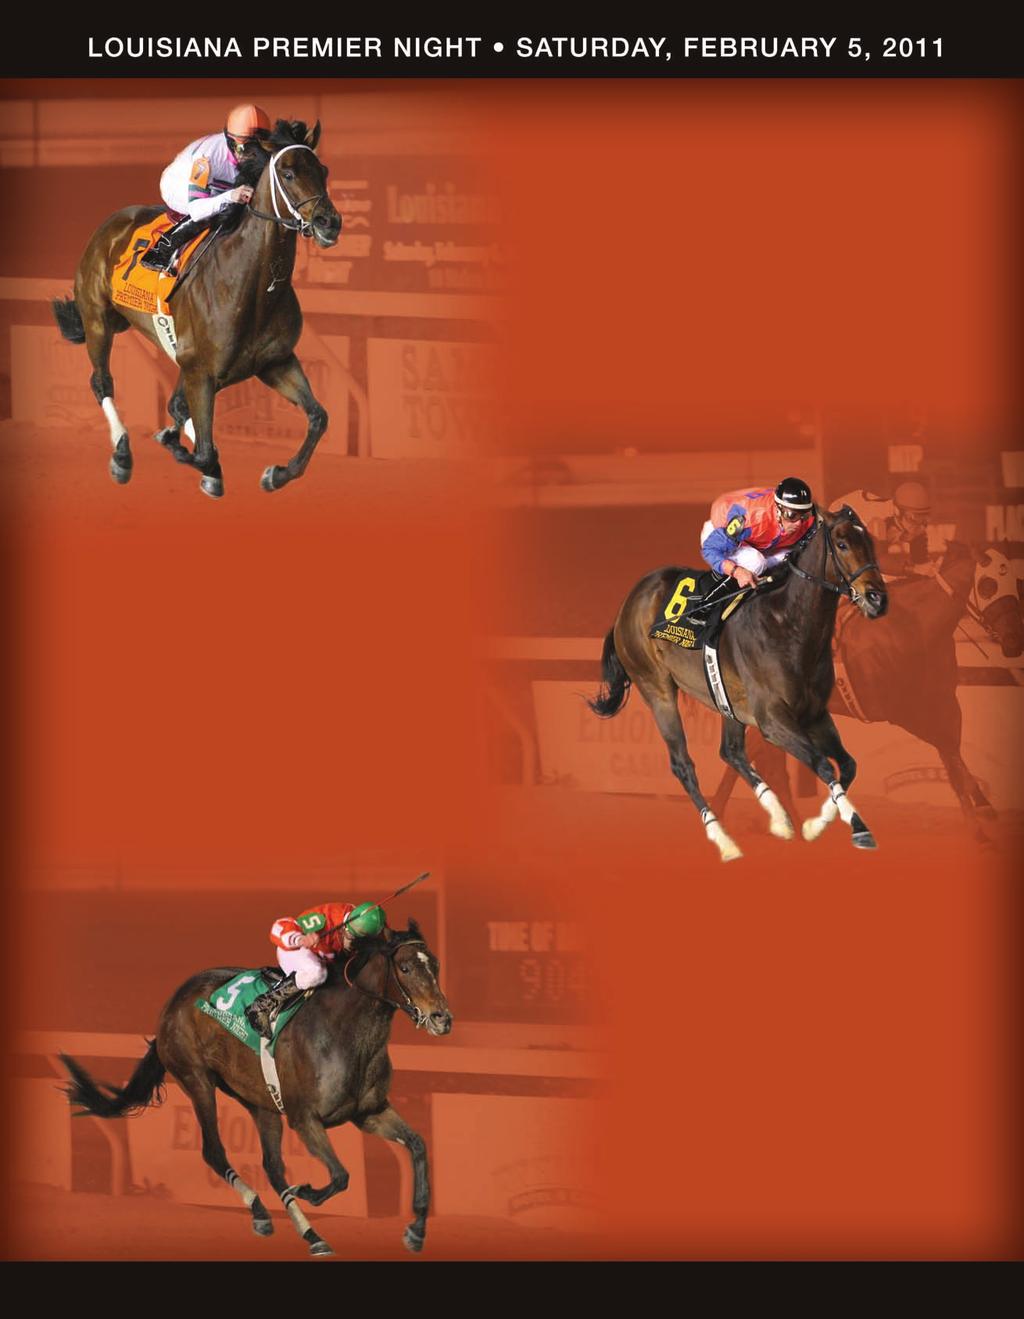 Louisiana Premier Night is one of the most exciting and highly anticipated programs each year at Delta Downs.